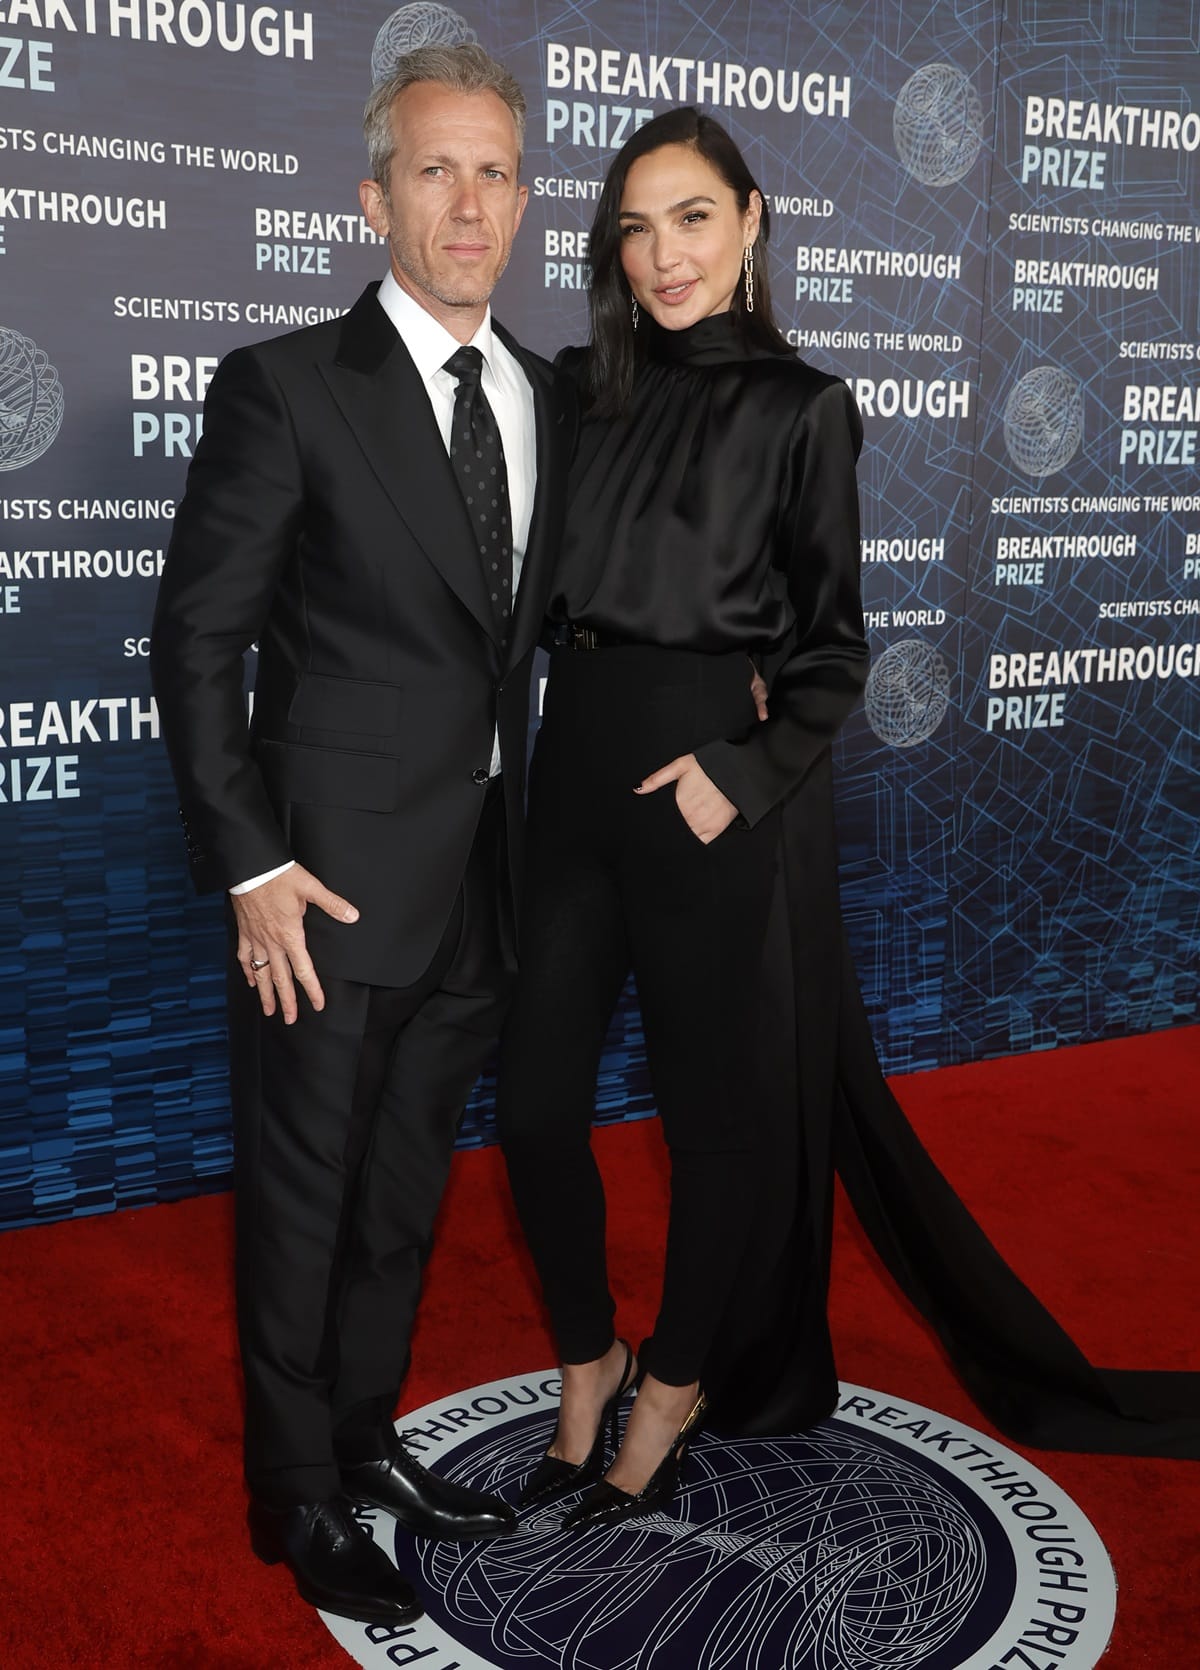 At the Breakthrough Prize Ceremony 2023 at the Academy Museum of Motion Pictures in Los Angeles on April 15, 2023, Gal Gadot opted for an all-black ensemble and was joined by her husband, Jaron Varsano